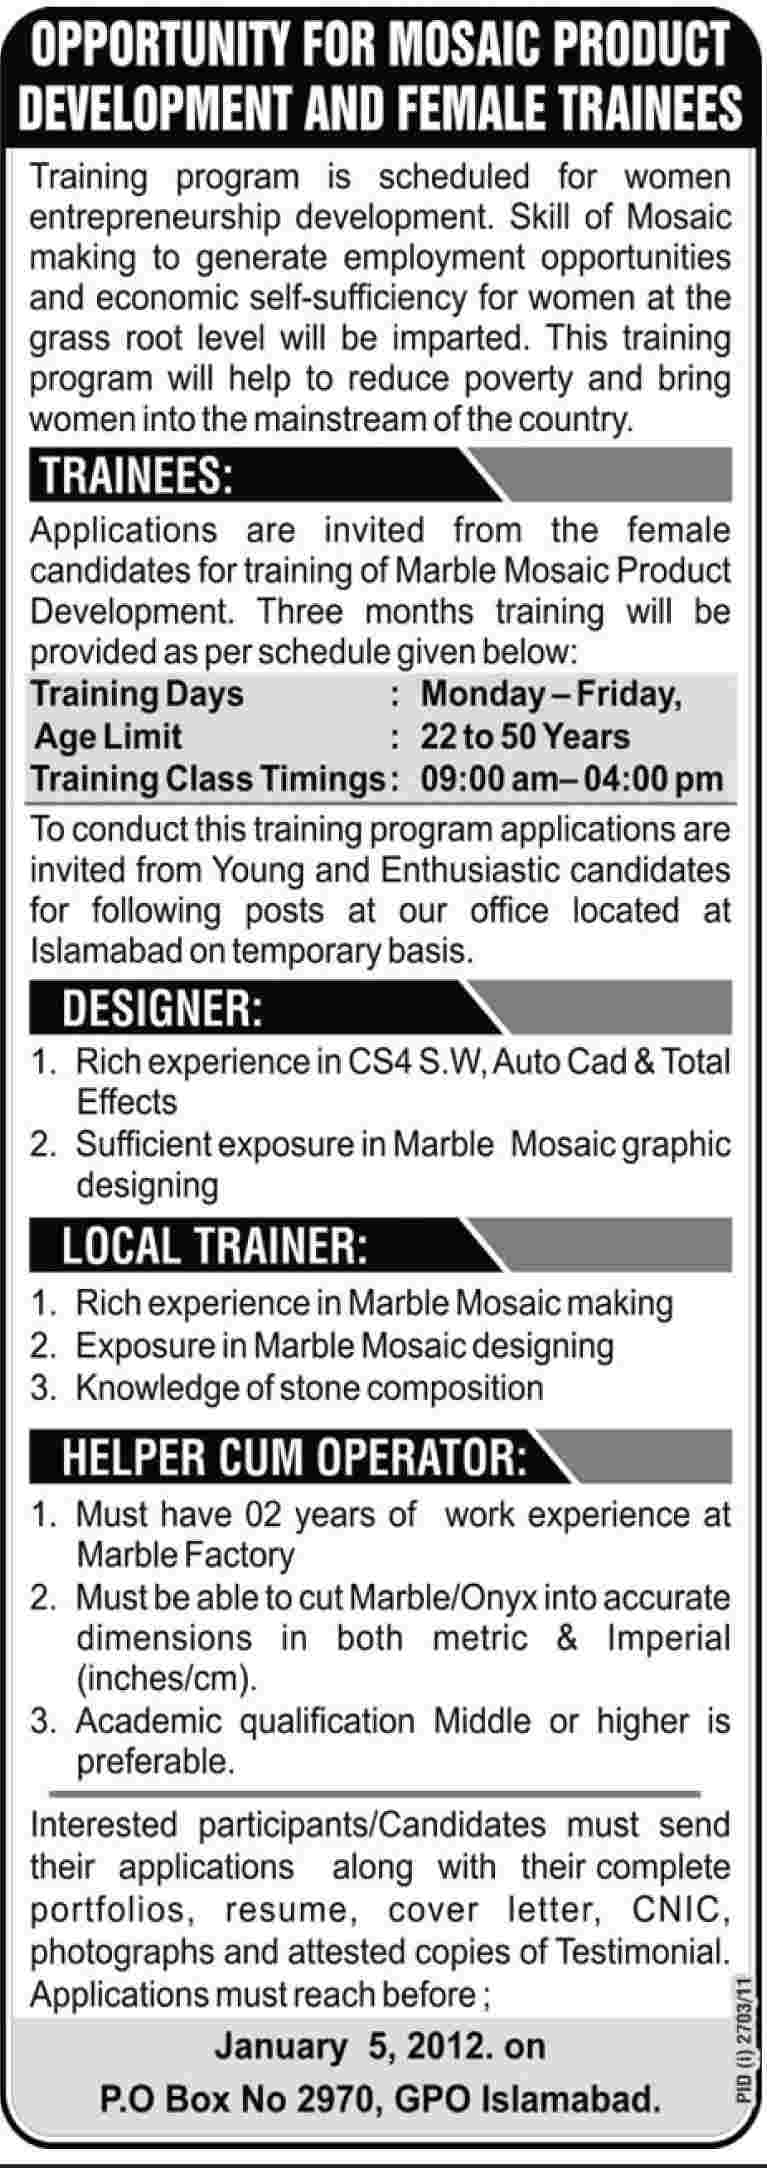 Jobs Opportunity for Mosaic Product Development and Female Trainees